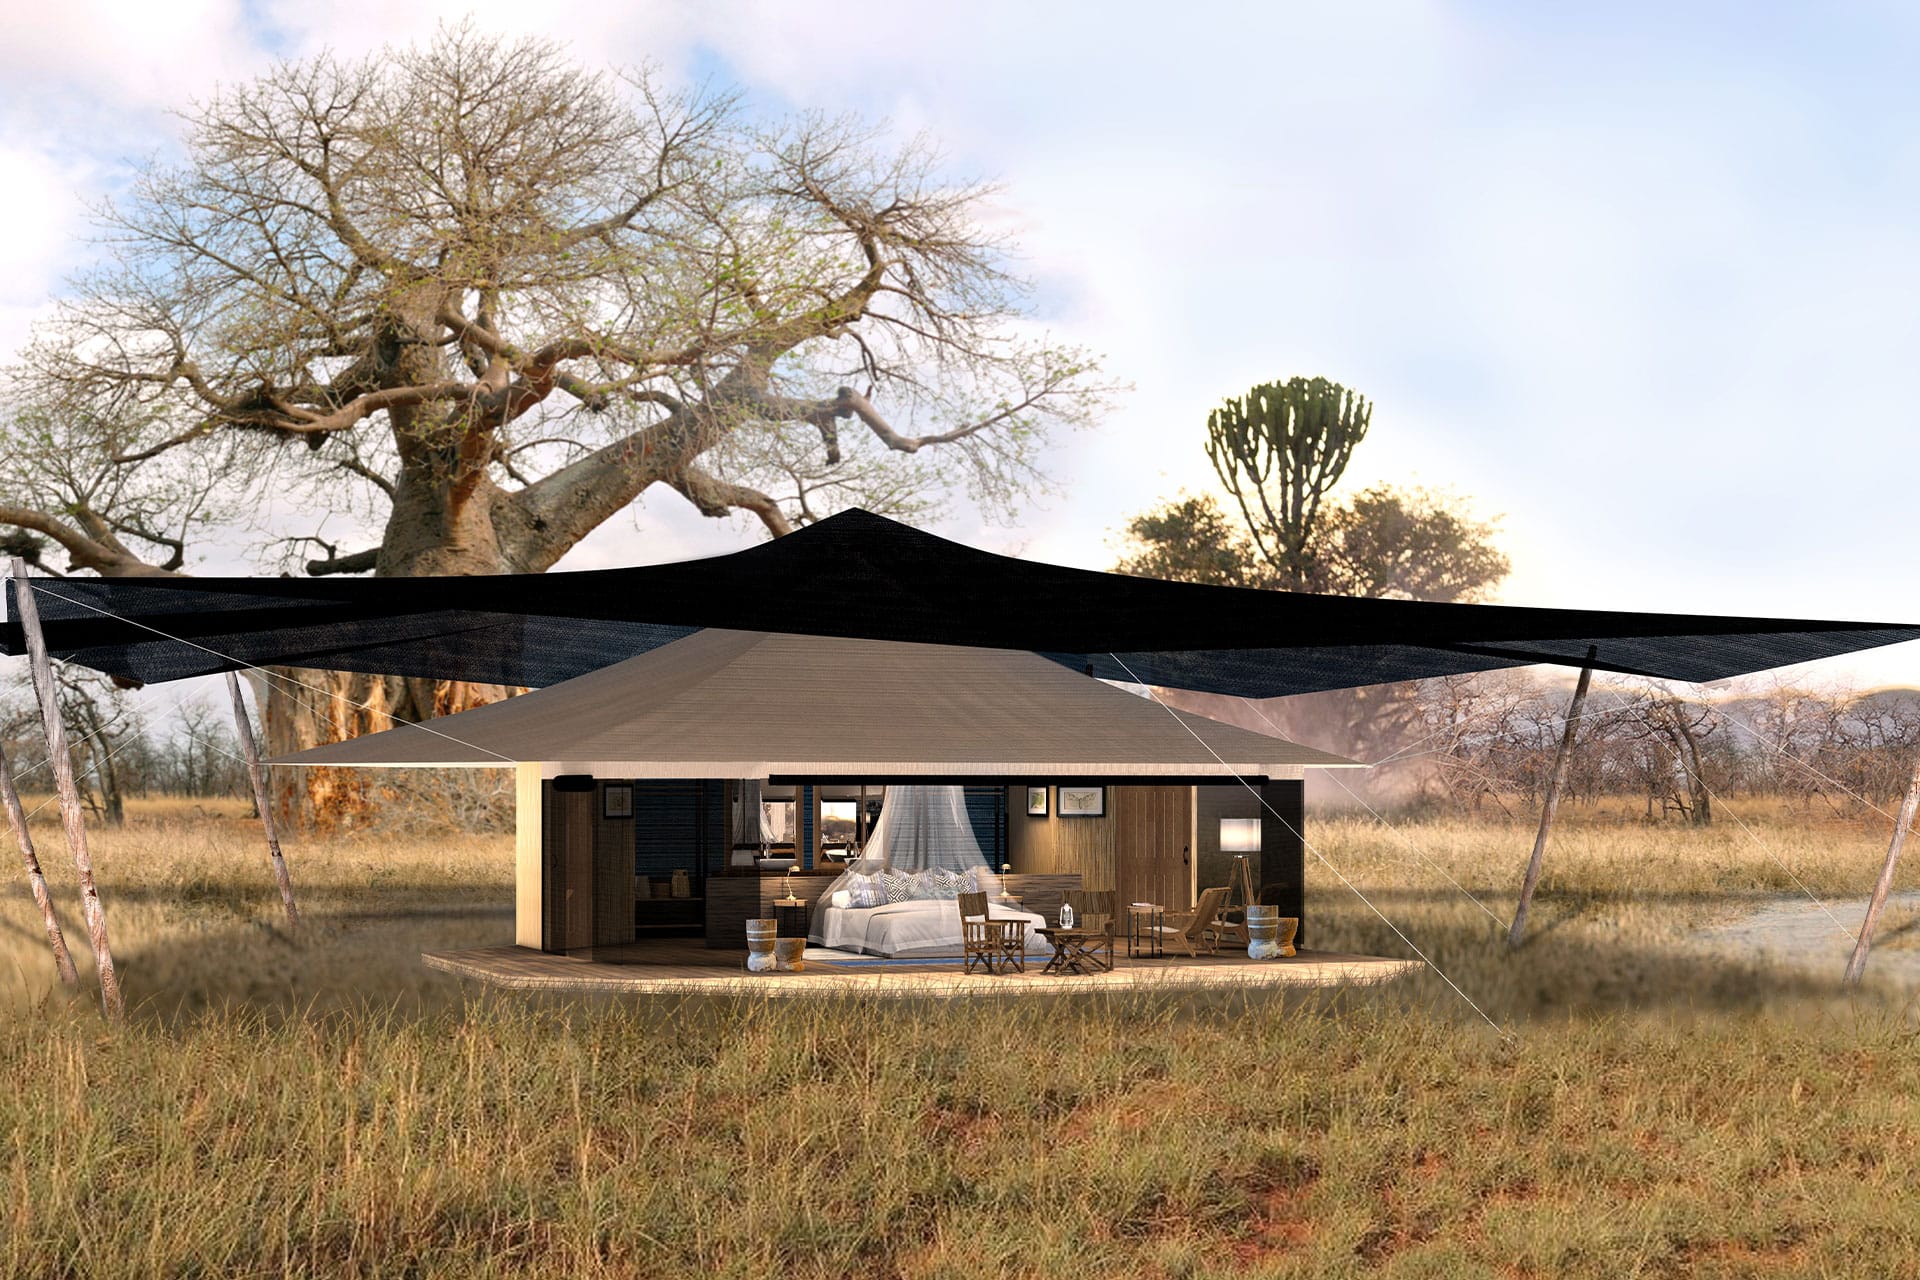 A luxury tent positioned on a raised wooden platform at Usanga Expedition Camp – a new luxury lodge in Africa opening in 2022.